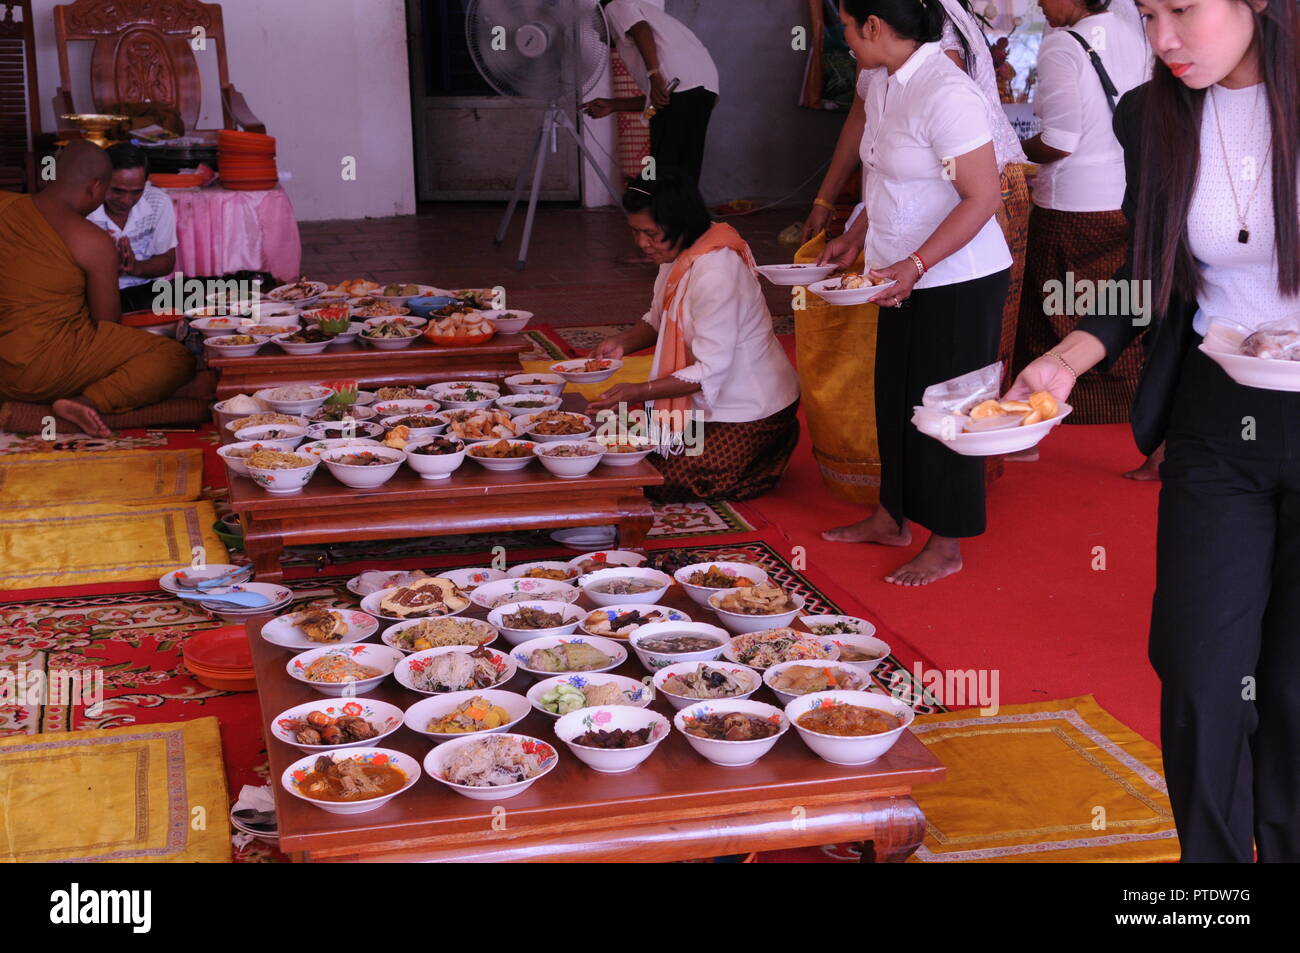 Kandal province, Cambodia. October 9th, 2018. Cambodian women lay out Khmer food for Buddhist monks at a temple during the Pchum Ben festival, also known as 'Ancestors' Day'. Credit: Kraig Lieb / Alamy Live News Stock Photo